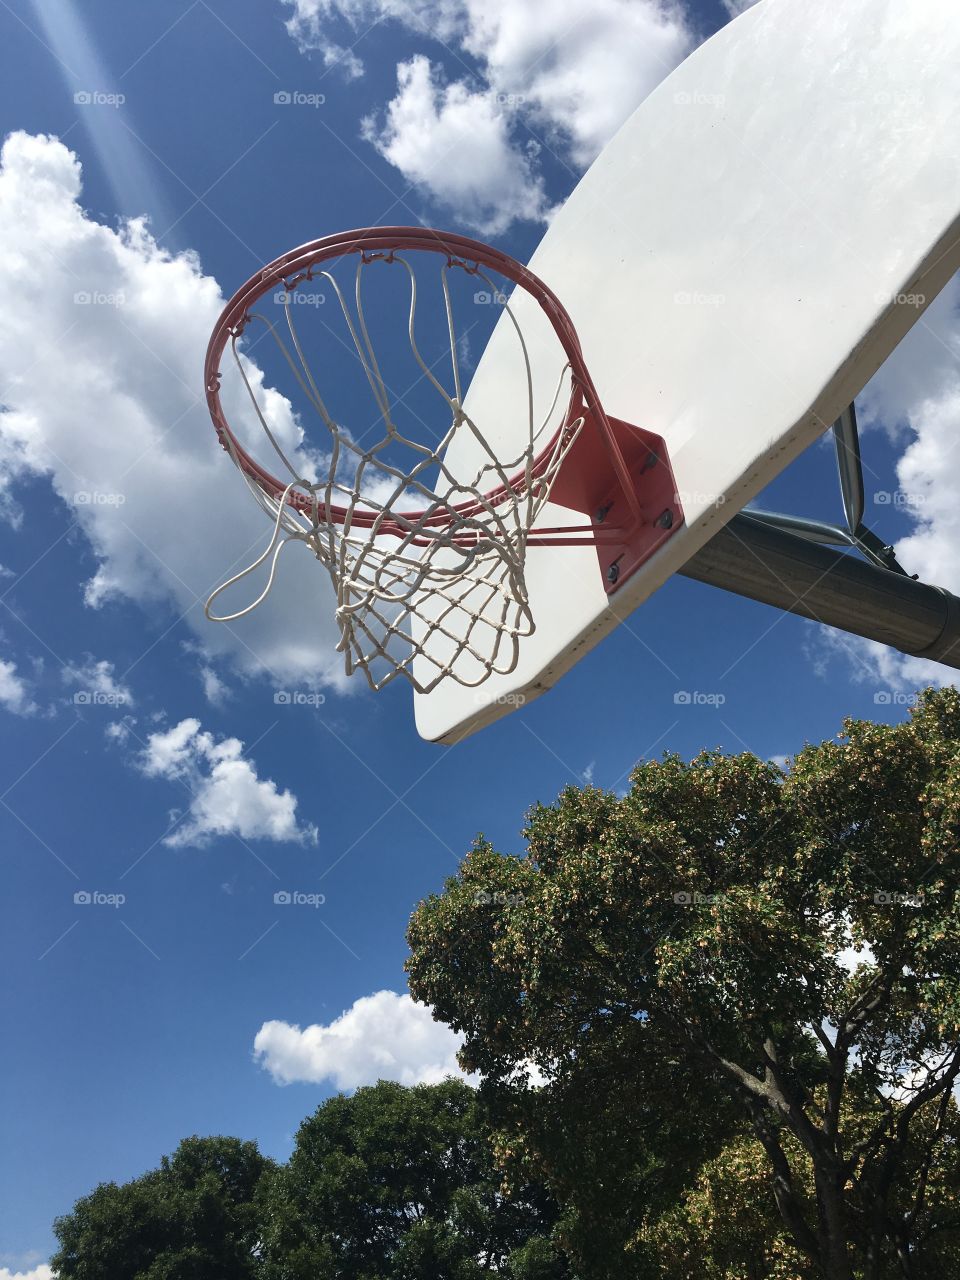 Basketball Net and Blue Sky with Clouds 2